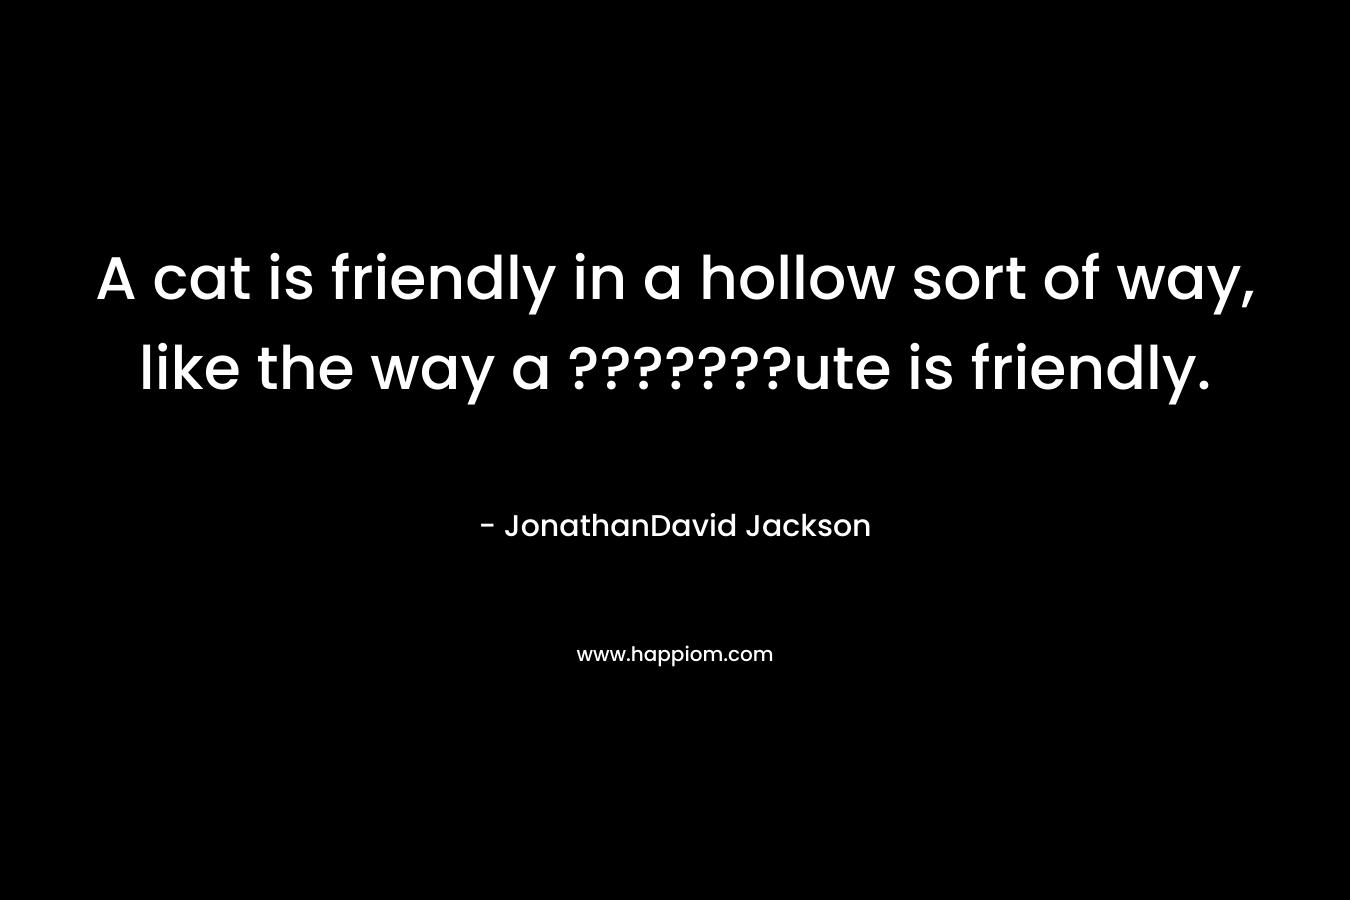 A cat is friendly in a hollow sort of way, like the way a ???????ute is friendly. – JonathanDavid Jackson